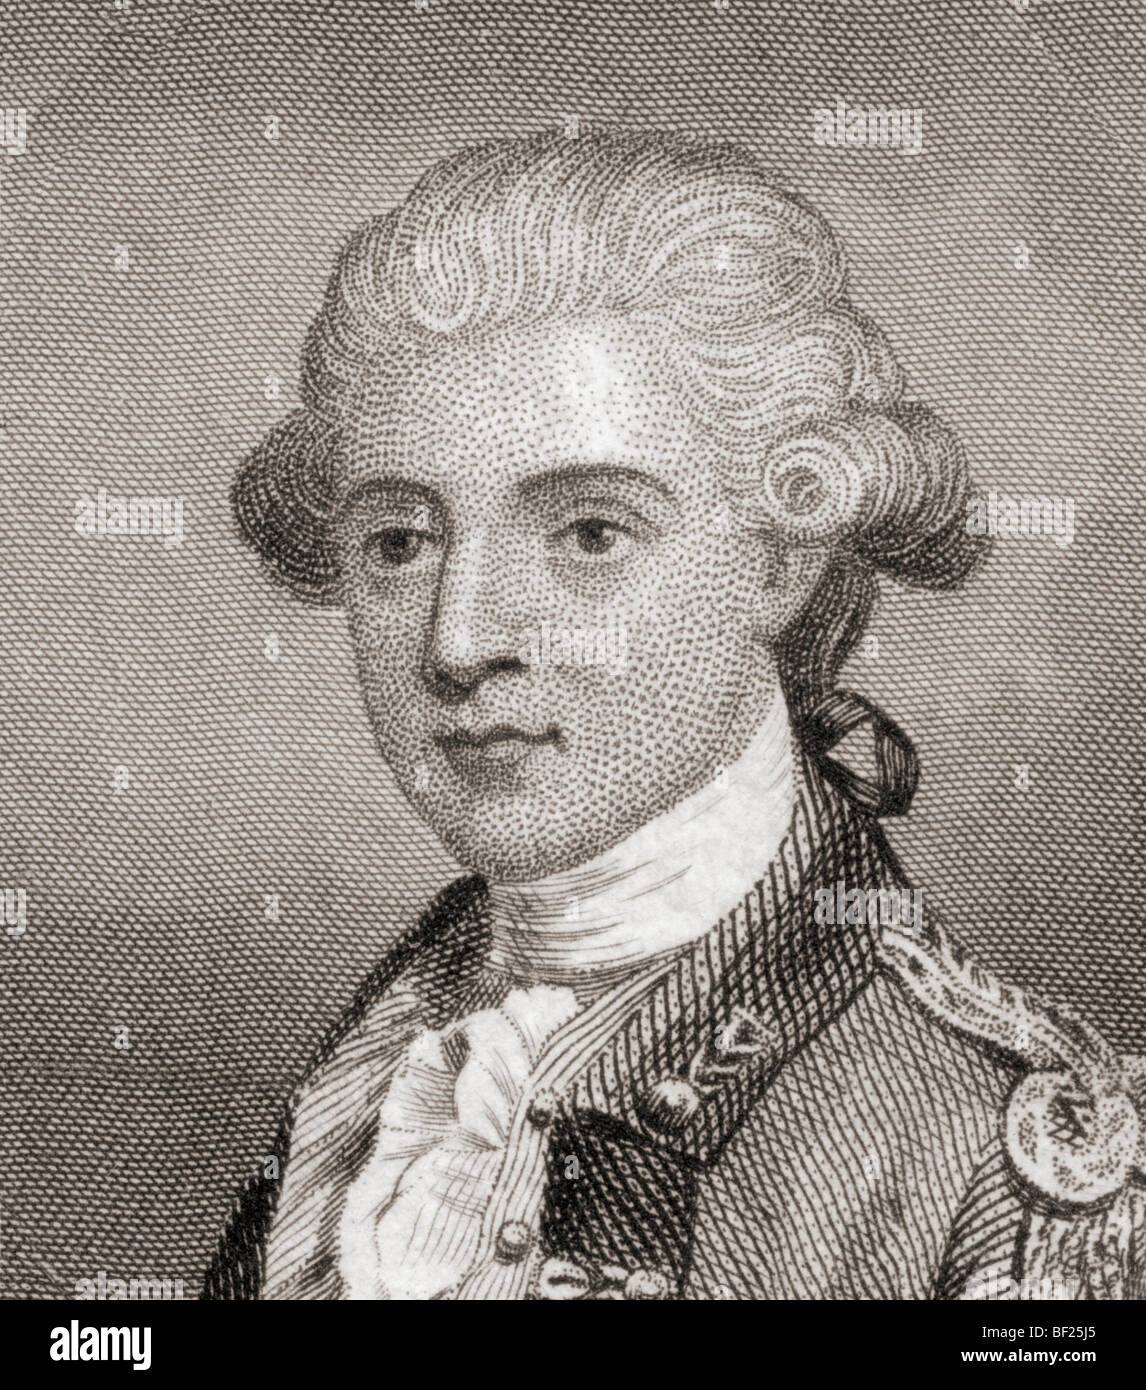 John Andre, 1750 to 1780. British army officer hanged as a spy during the American Revolutionary War. Stock Photo